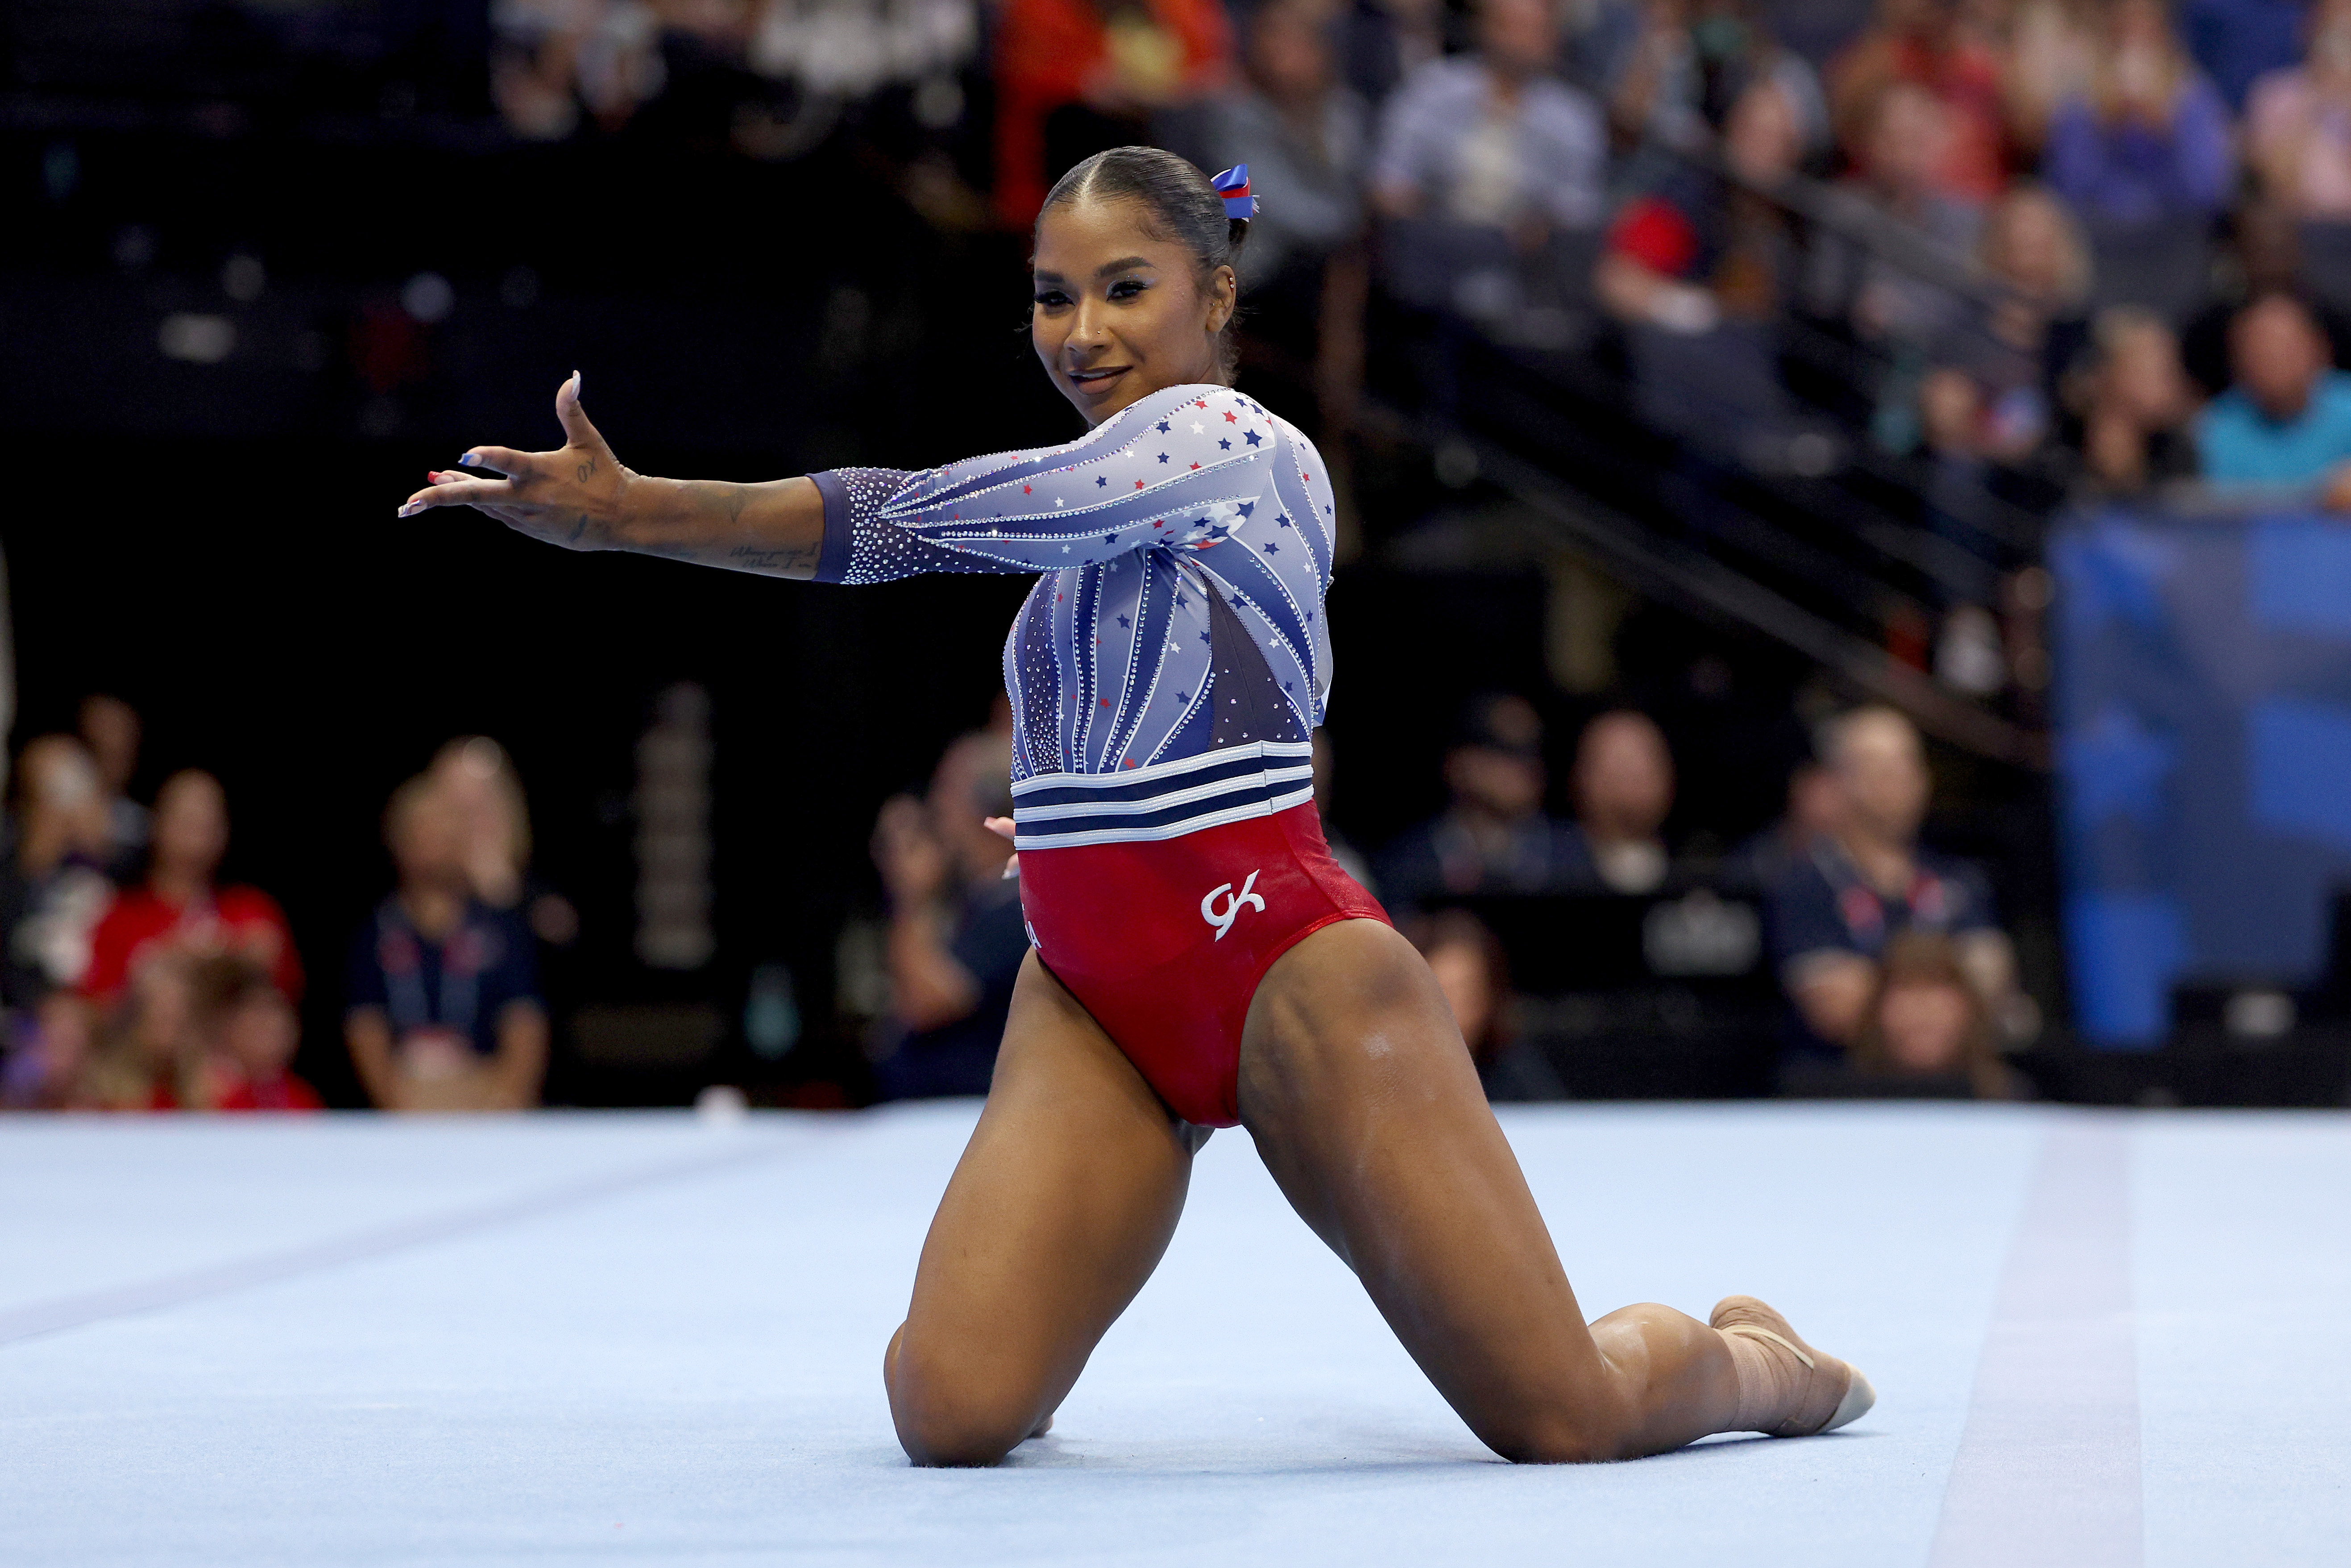 How to watch gymnastics all-around at the 2024 Olympics